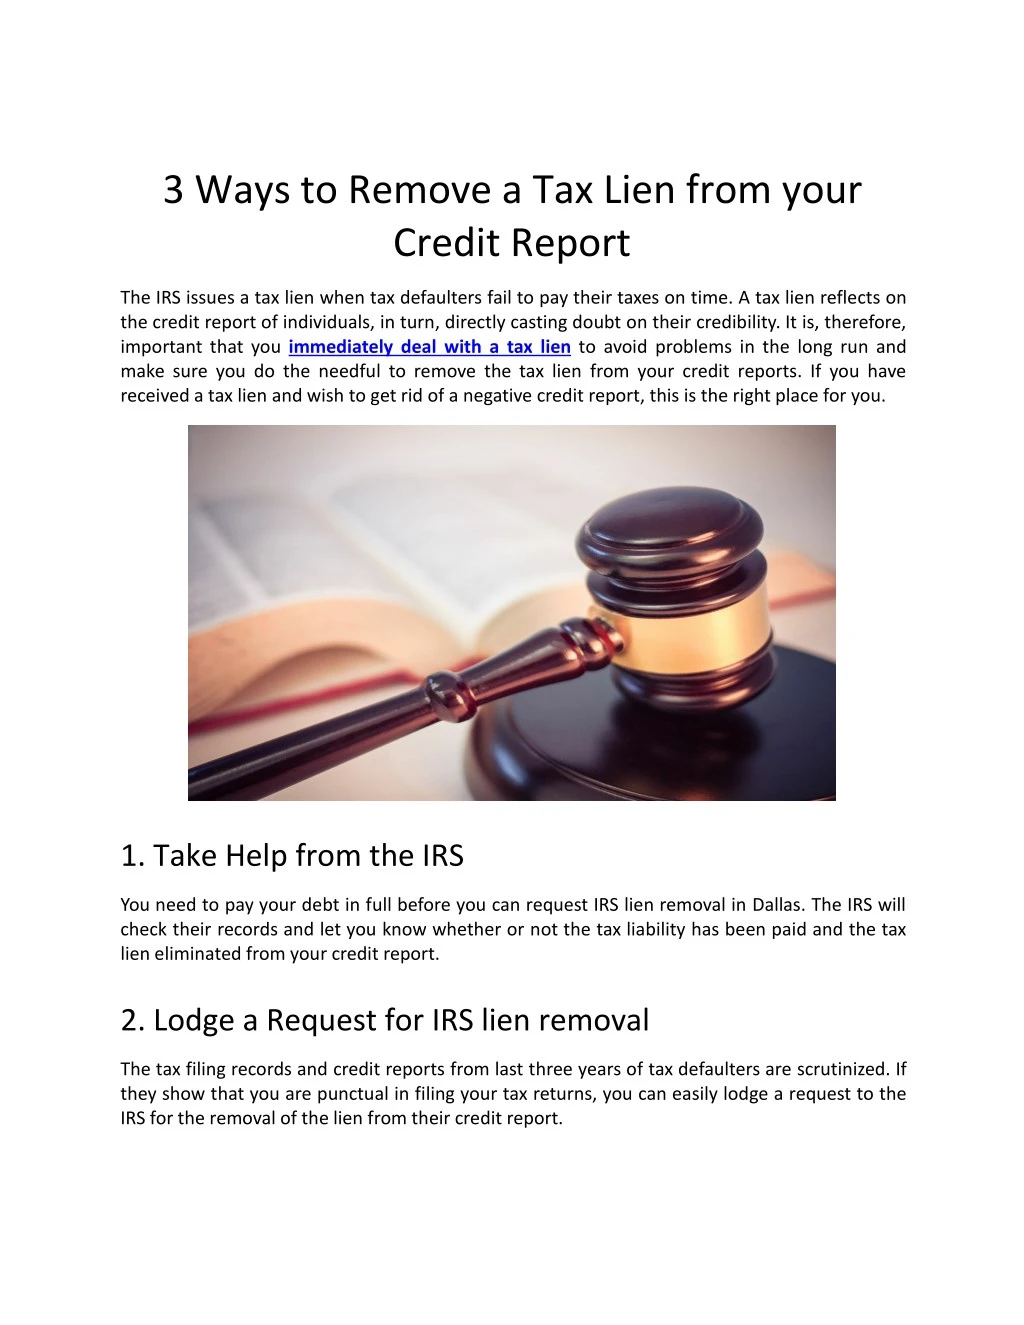 3 ways to remove a tax lien from your credit